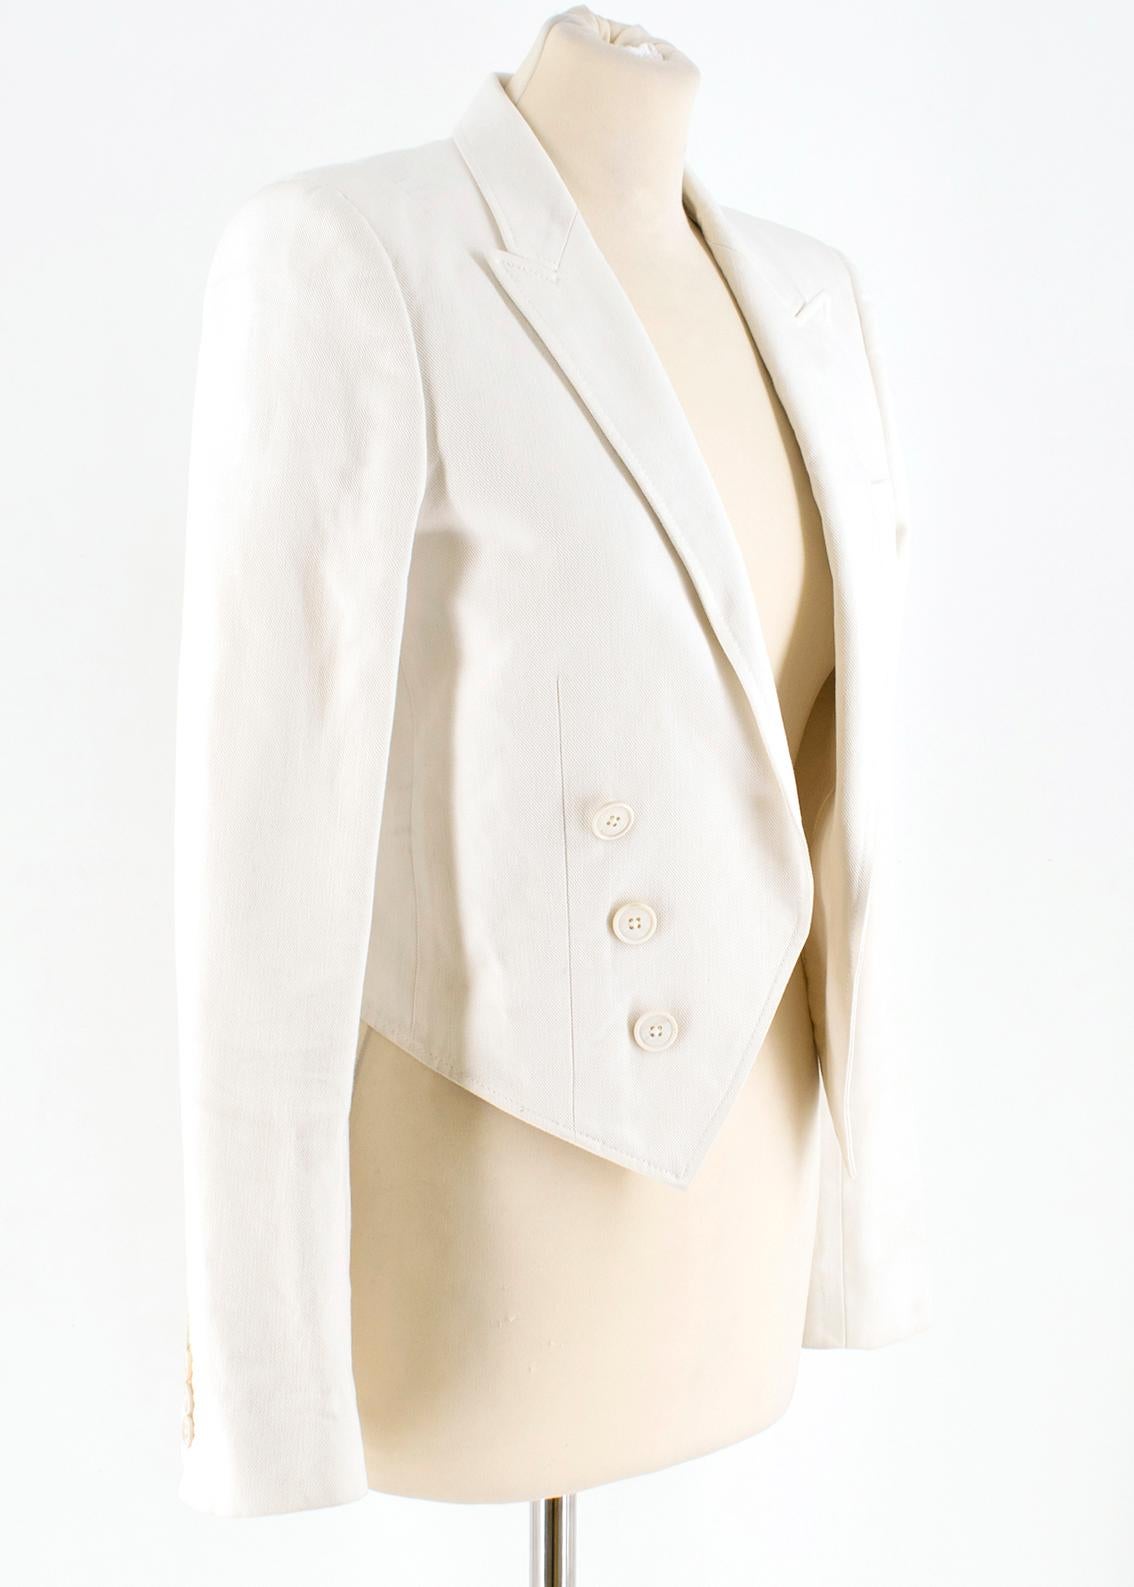 Saint Laurent Runway cropped white blazer

- White, cotton drill 
- Peak lapels, long sleeves
- Heavily padded shoulders, decorative buttons on cuffs 
- Single chest welt pockets
- Angular hem 
- Open front, decorative double breasted fastening 
-